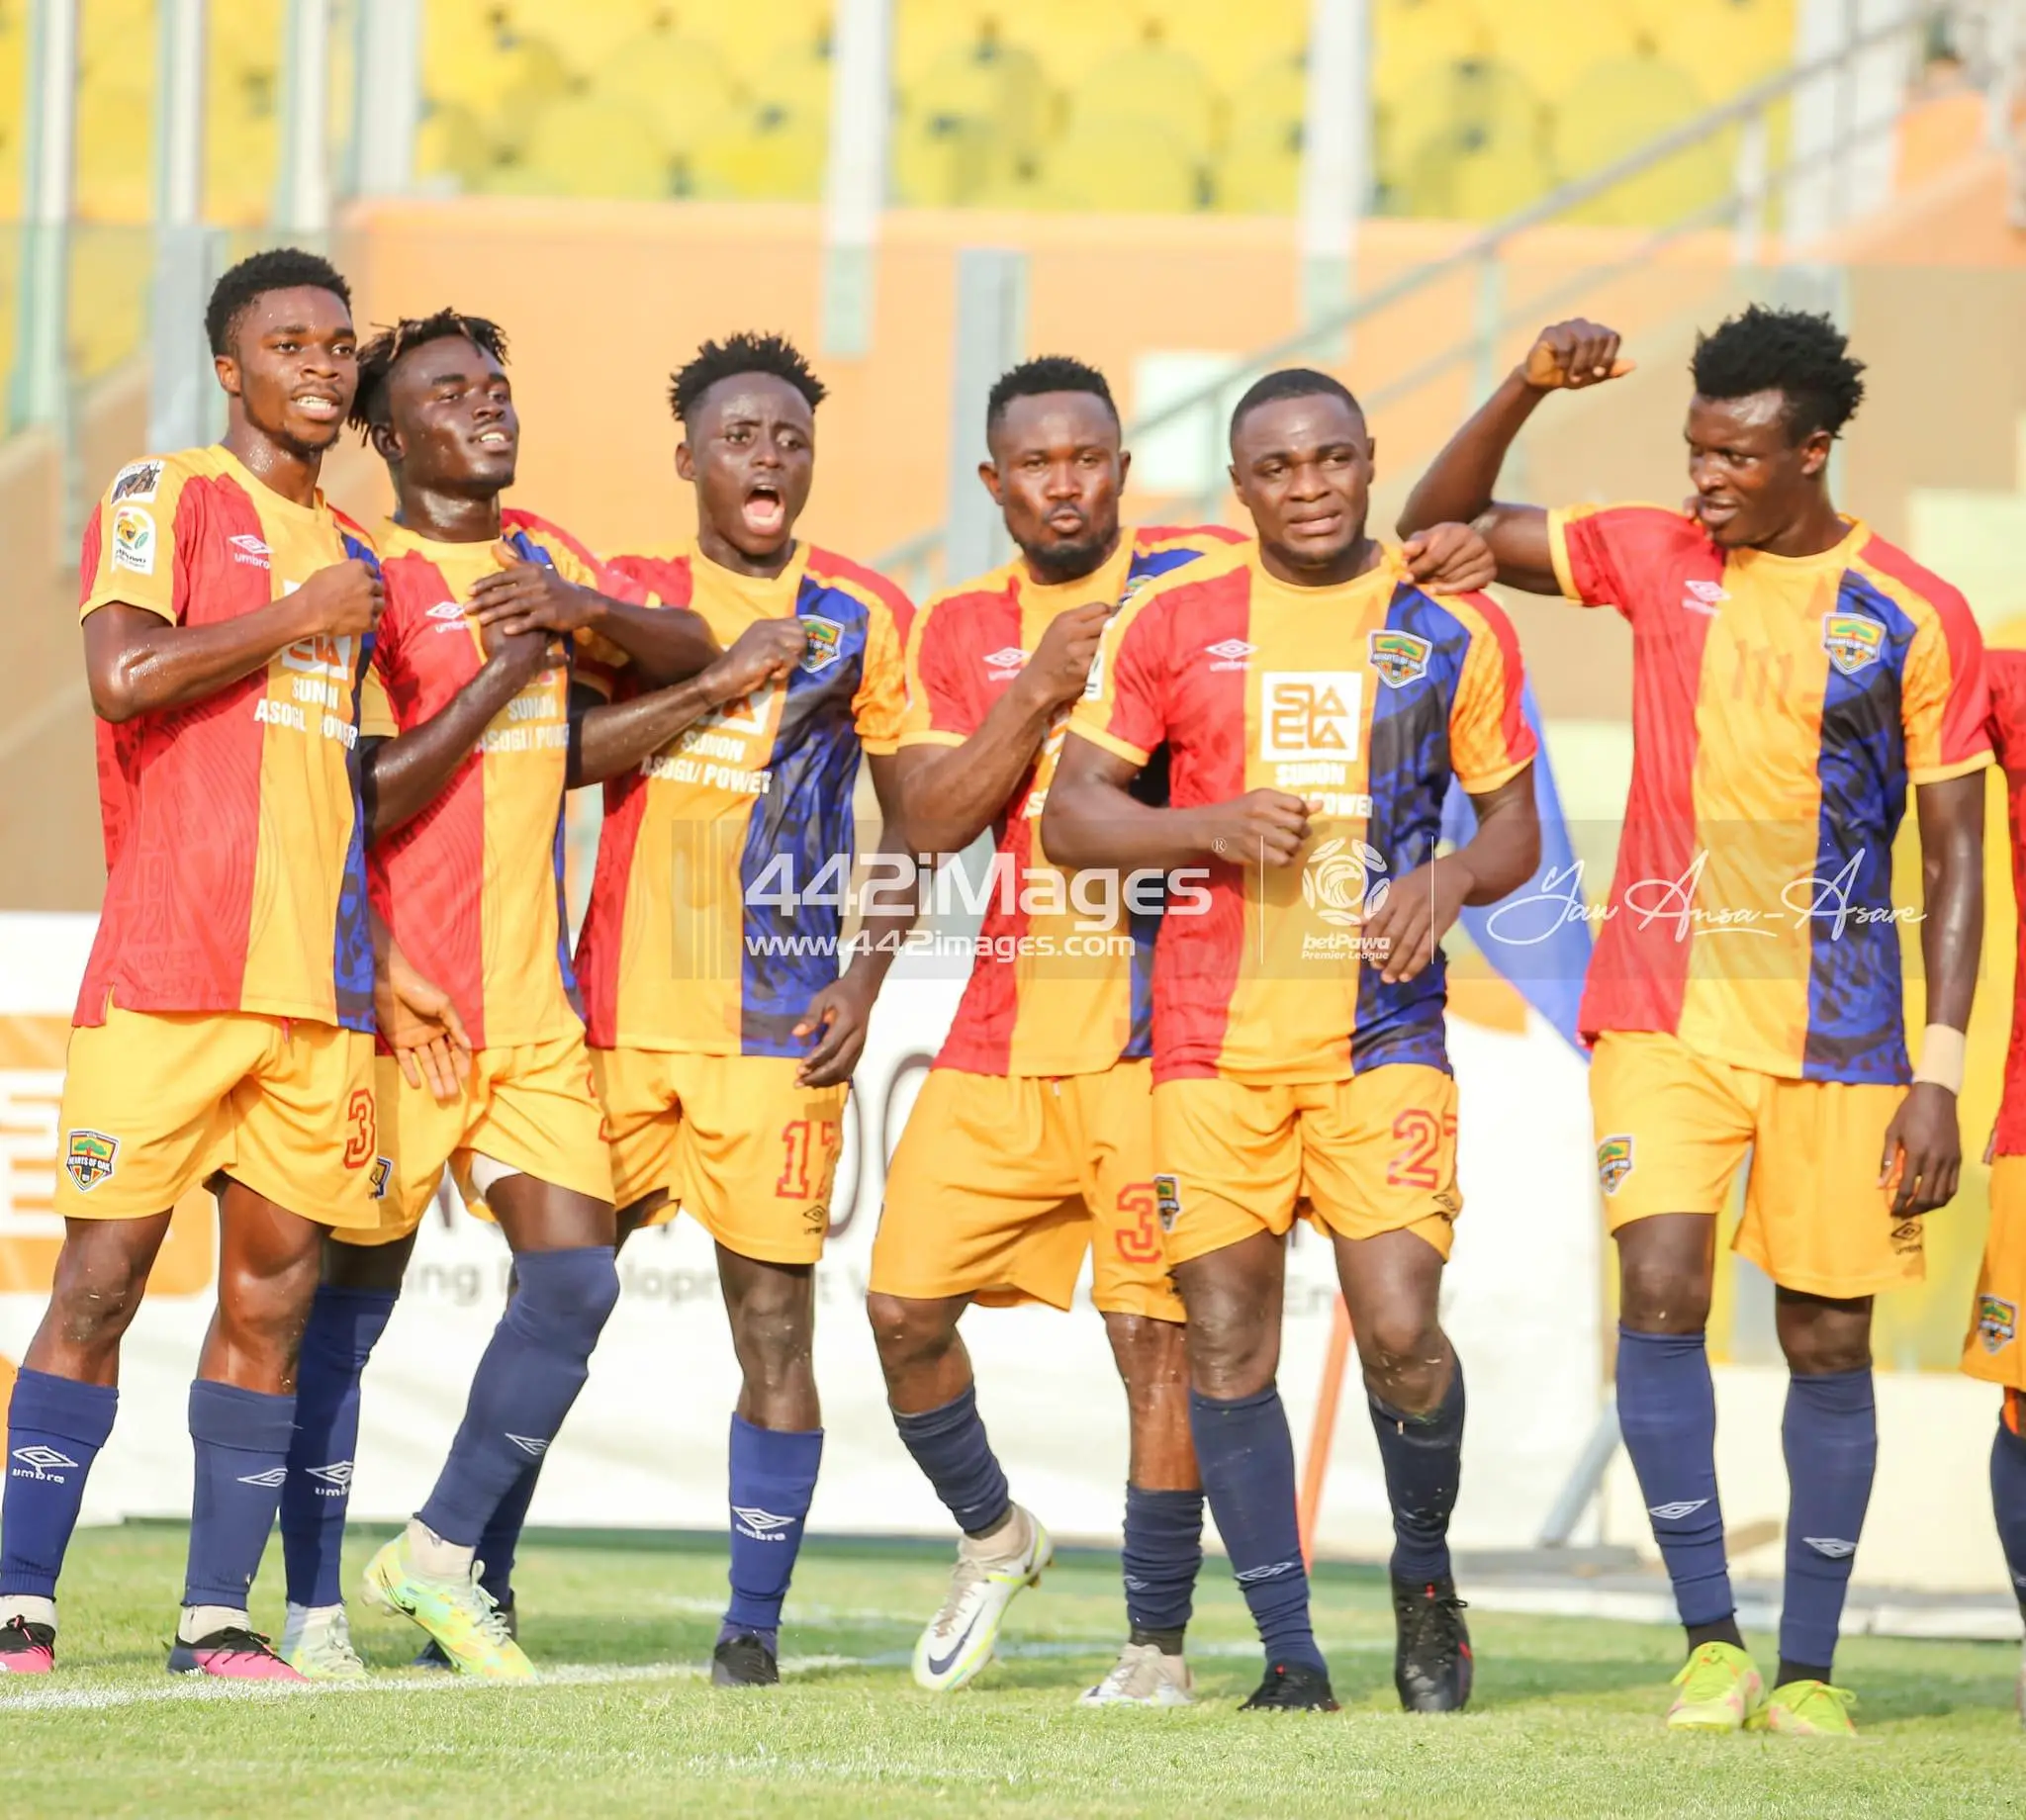 Hearts of Oak face Aduana FC in top of the table clash